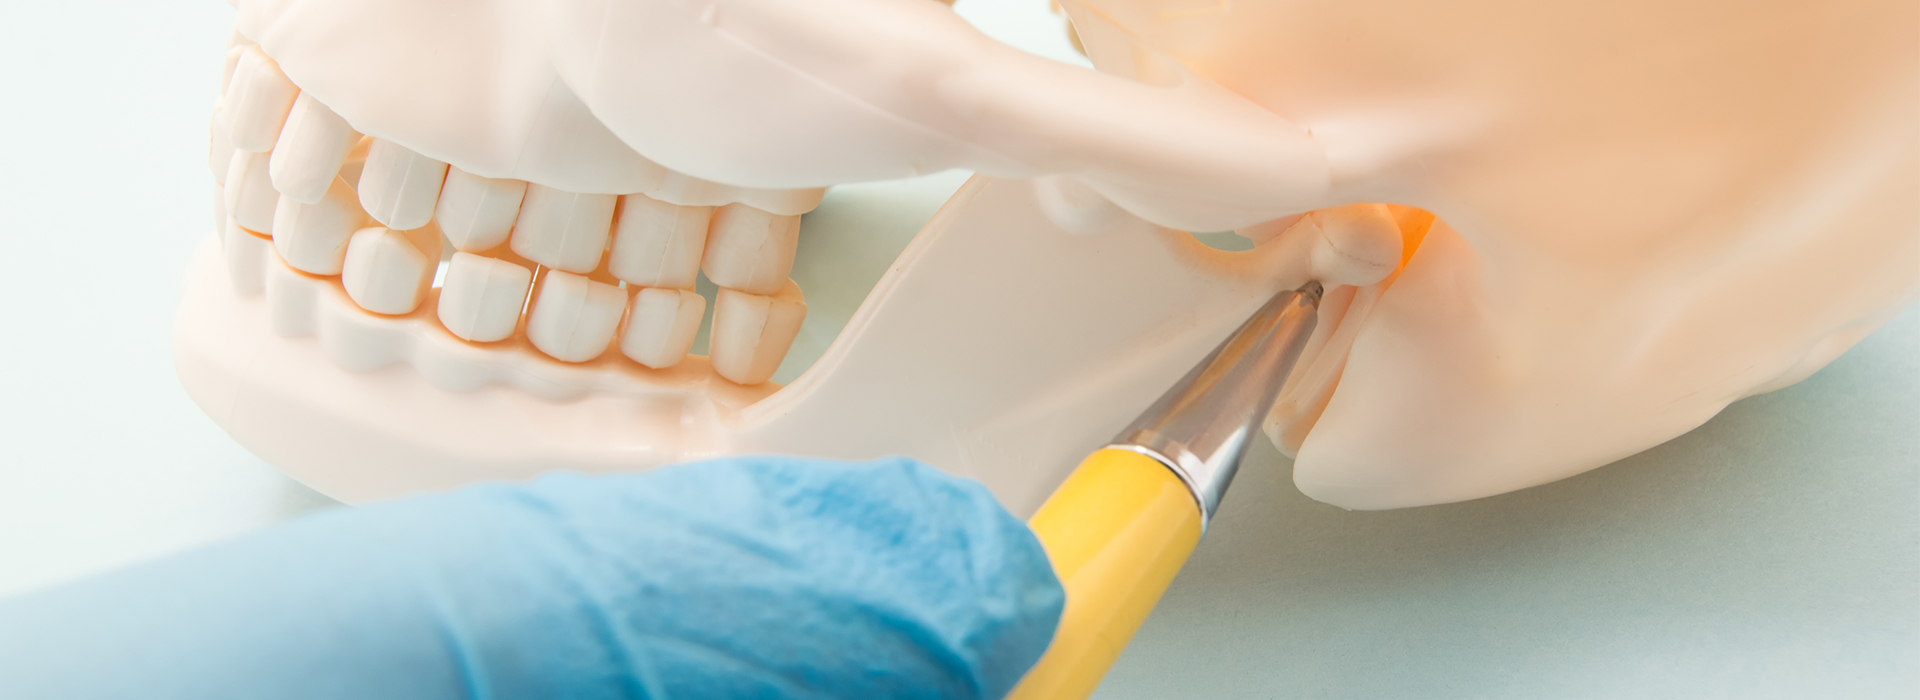 Plainfield Dental Care | One-Day Dental Implants, Root Canal Treatment and Dental Fillings